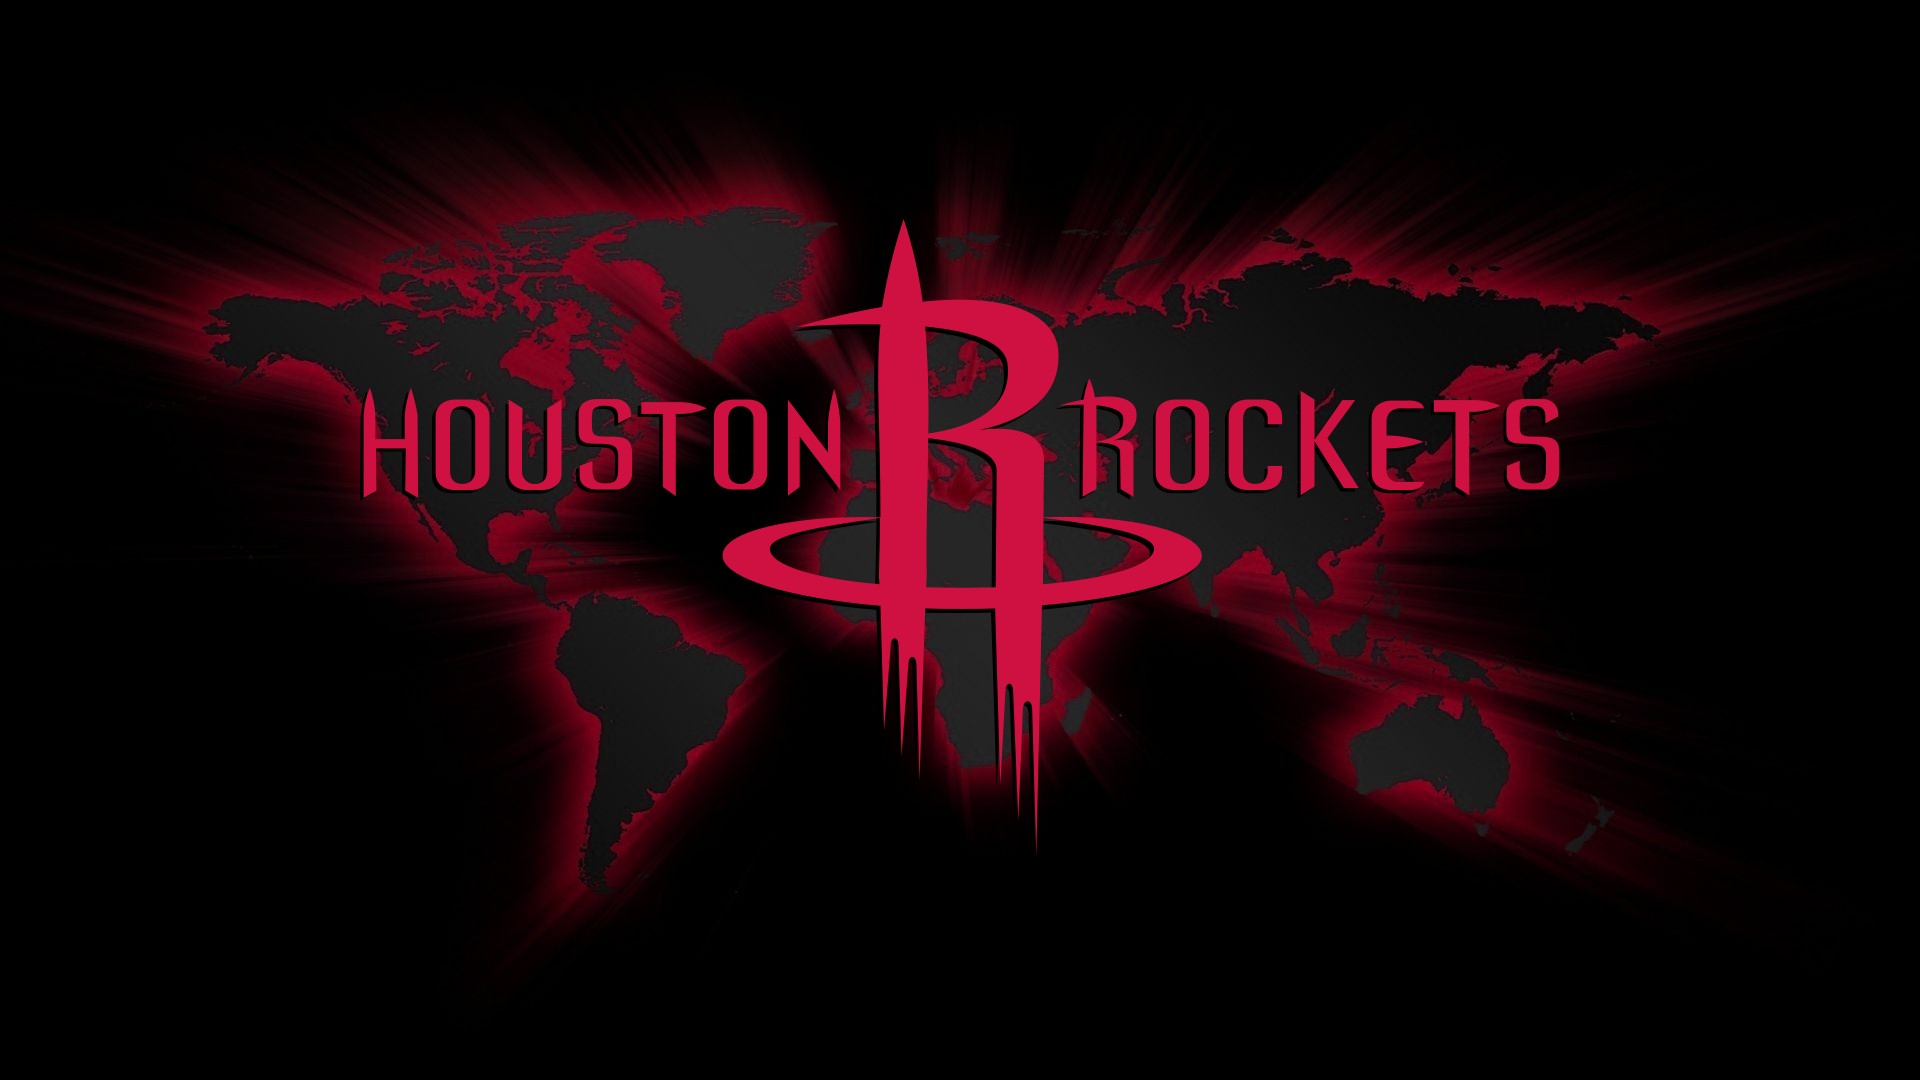 Hd Background Houston Rockets With Image Dimensions Logo Wallpaper 2019 Wallpaper & Background Download